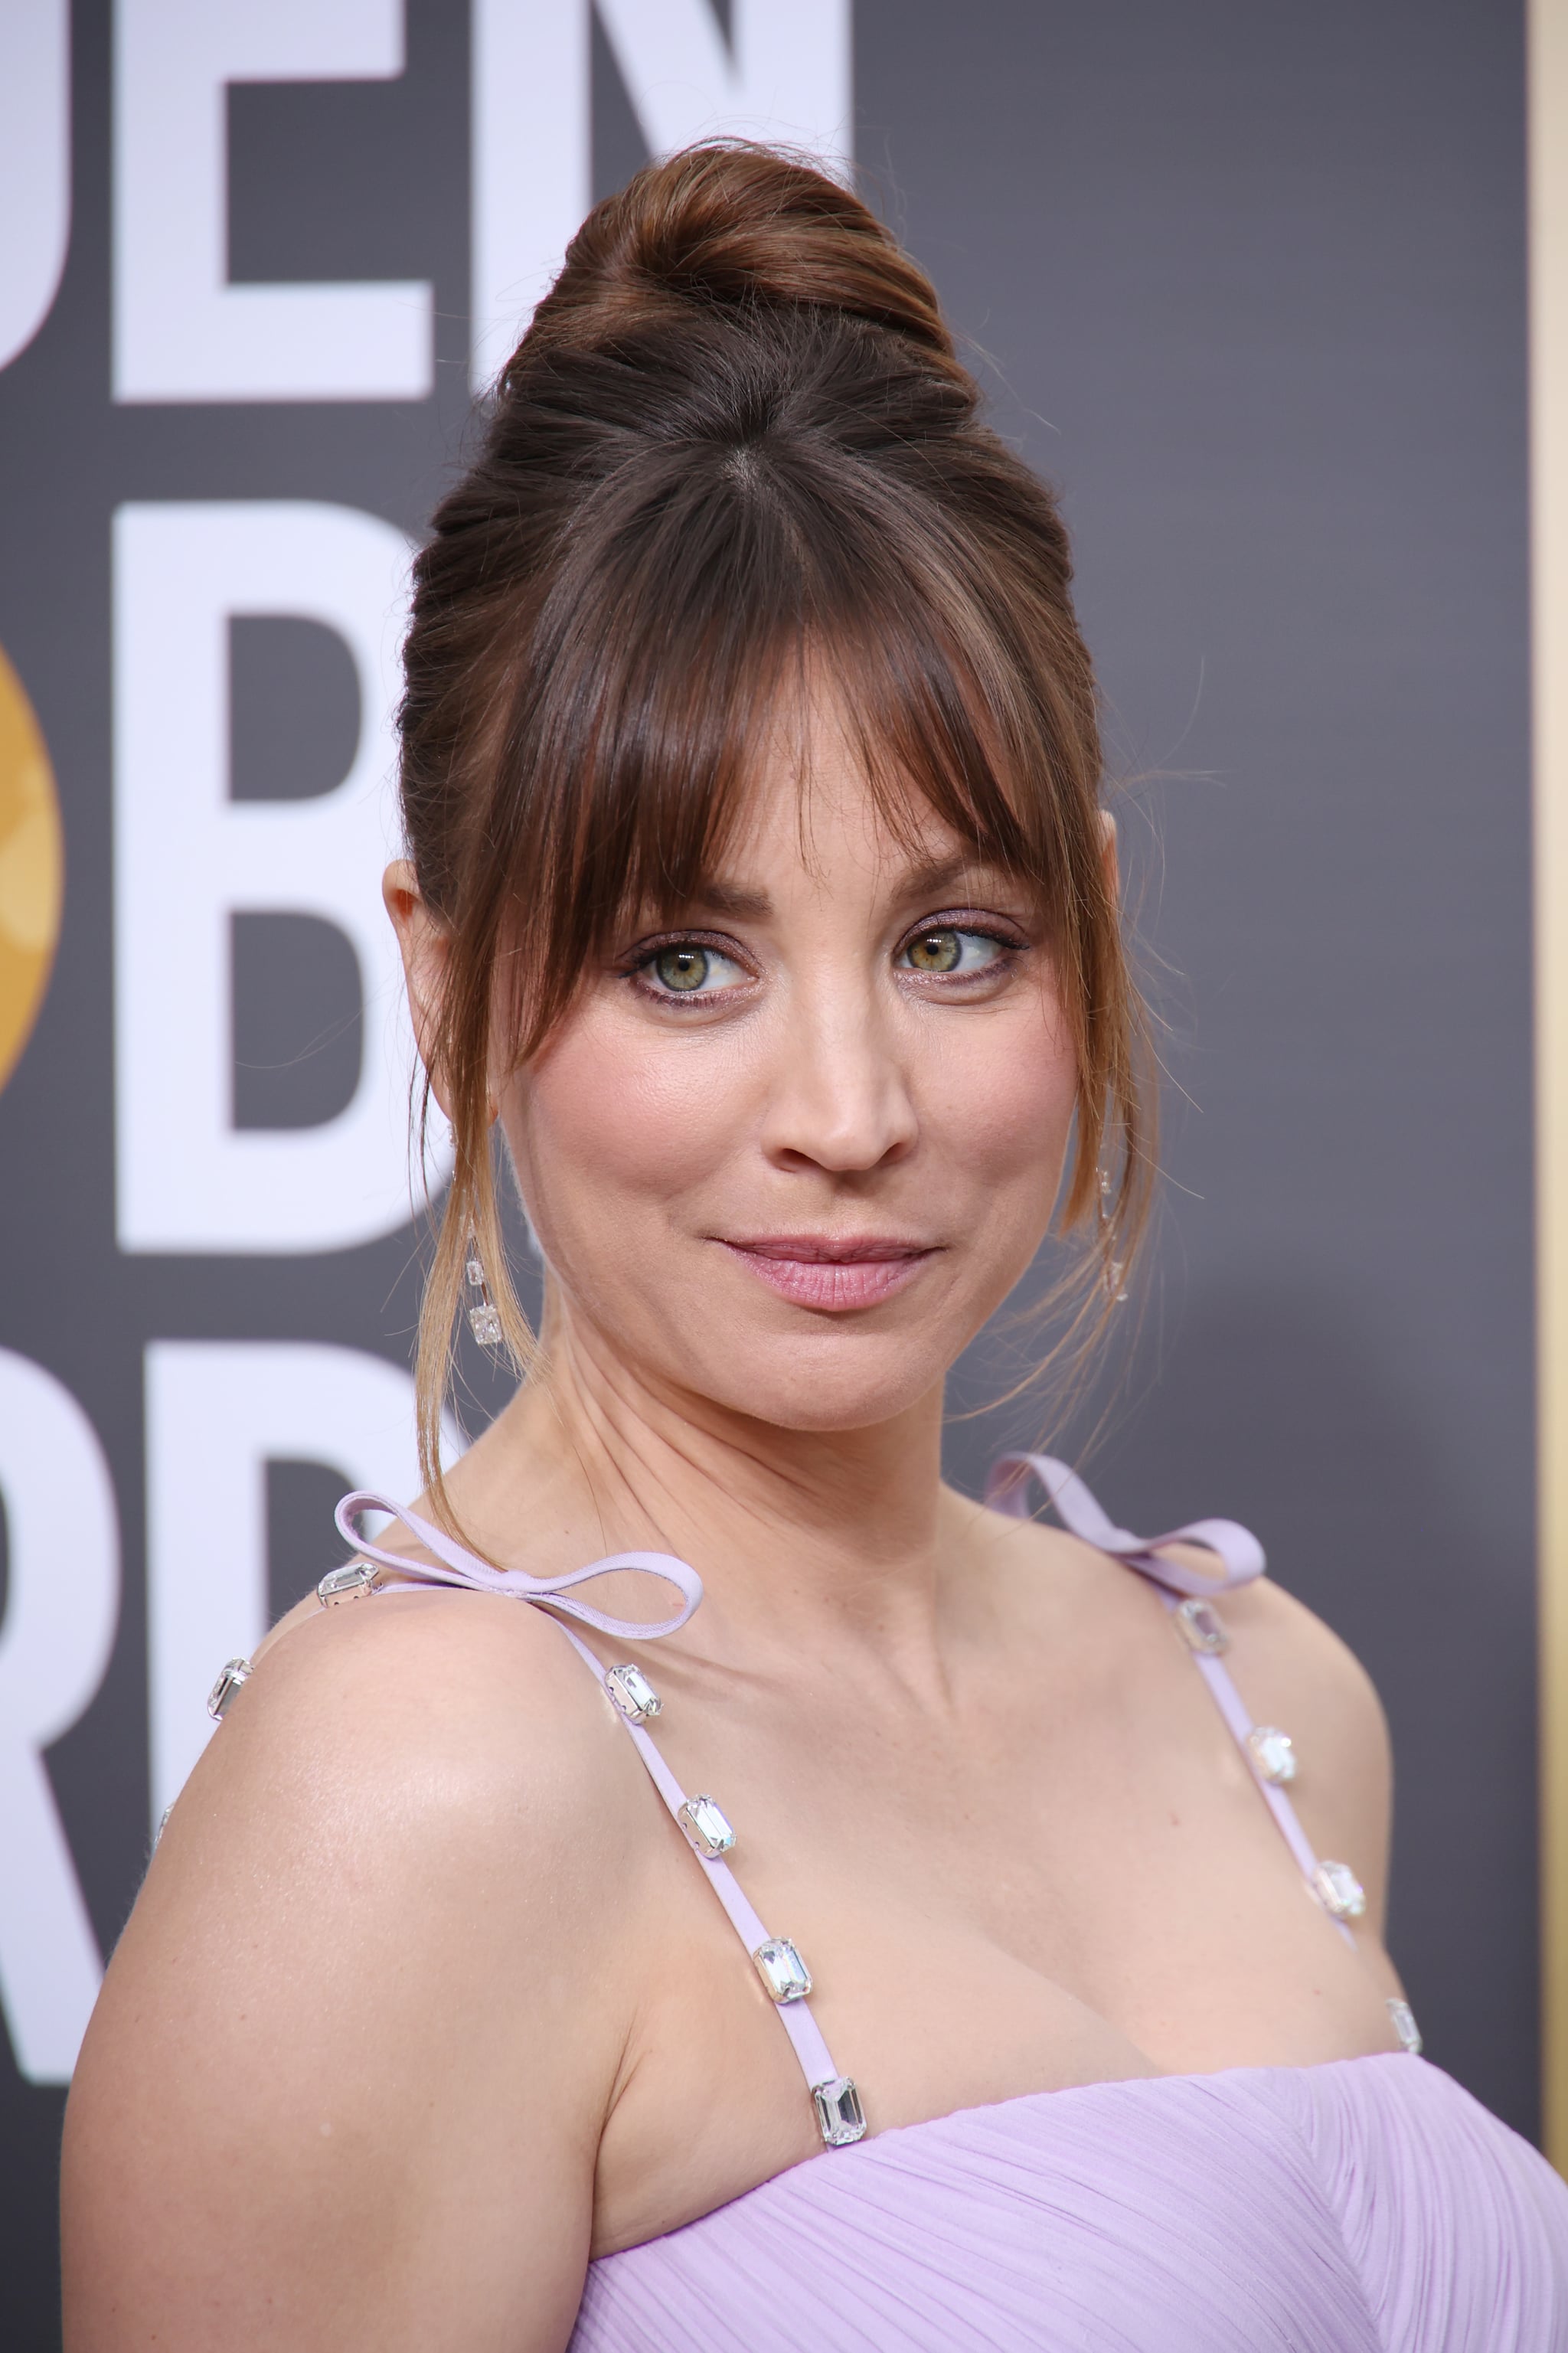 BEVERLY HILLS, CALIFORNIA - JANUARY 10: Kaley Cuoco attends the 80th Annual Golden Globe Awards at The Beverly Hilton on January 10, 2023 in Beverly Hills, California. (Photo by Daniele Venturelli/WireImage)